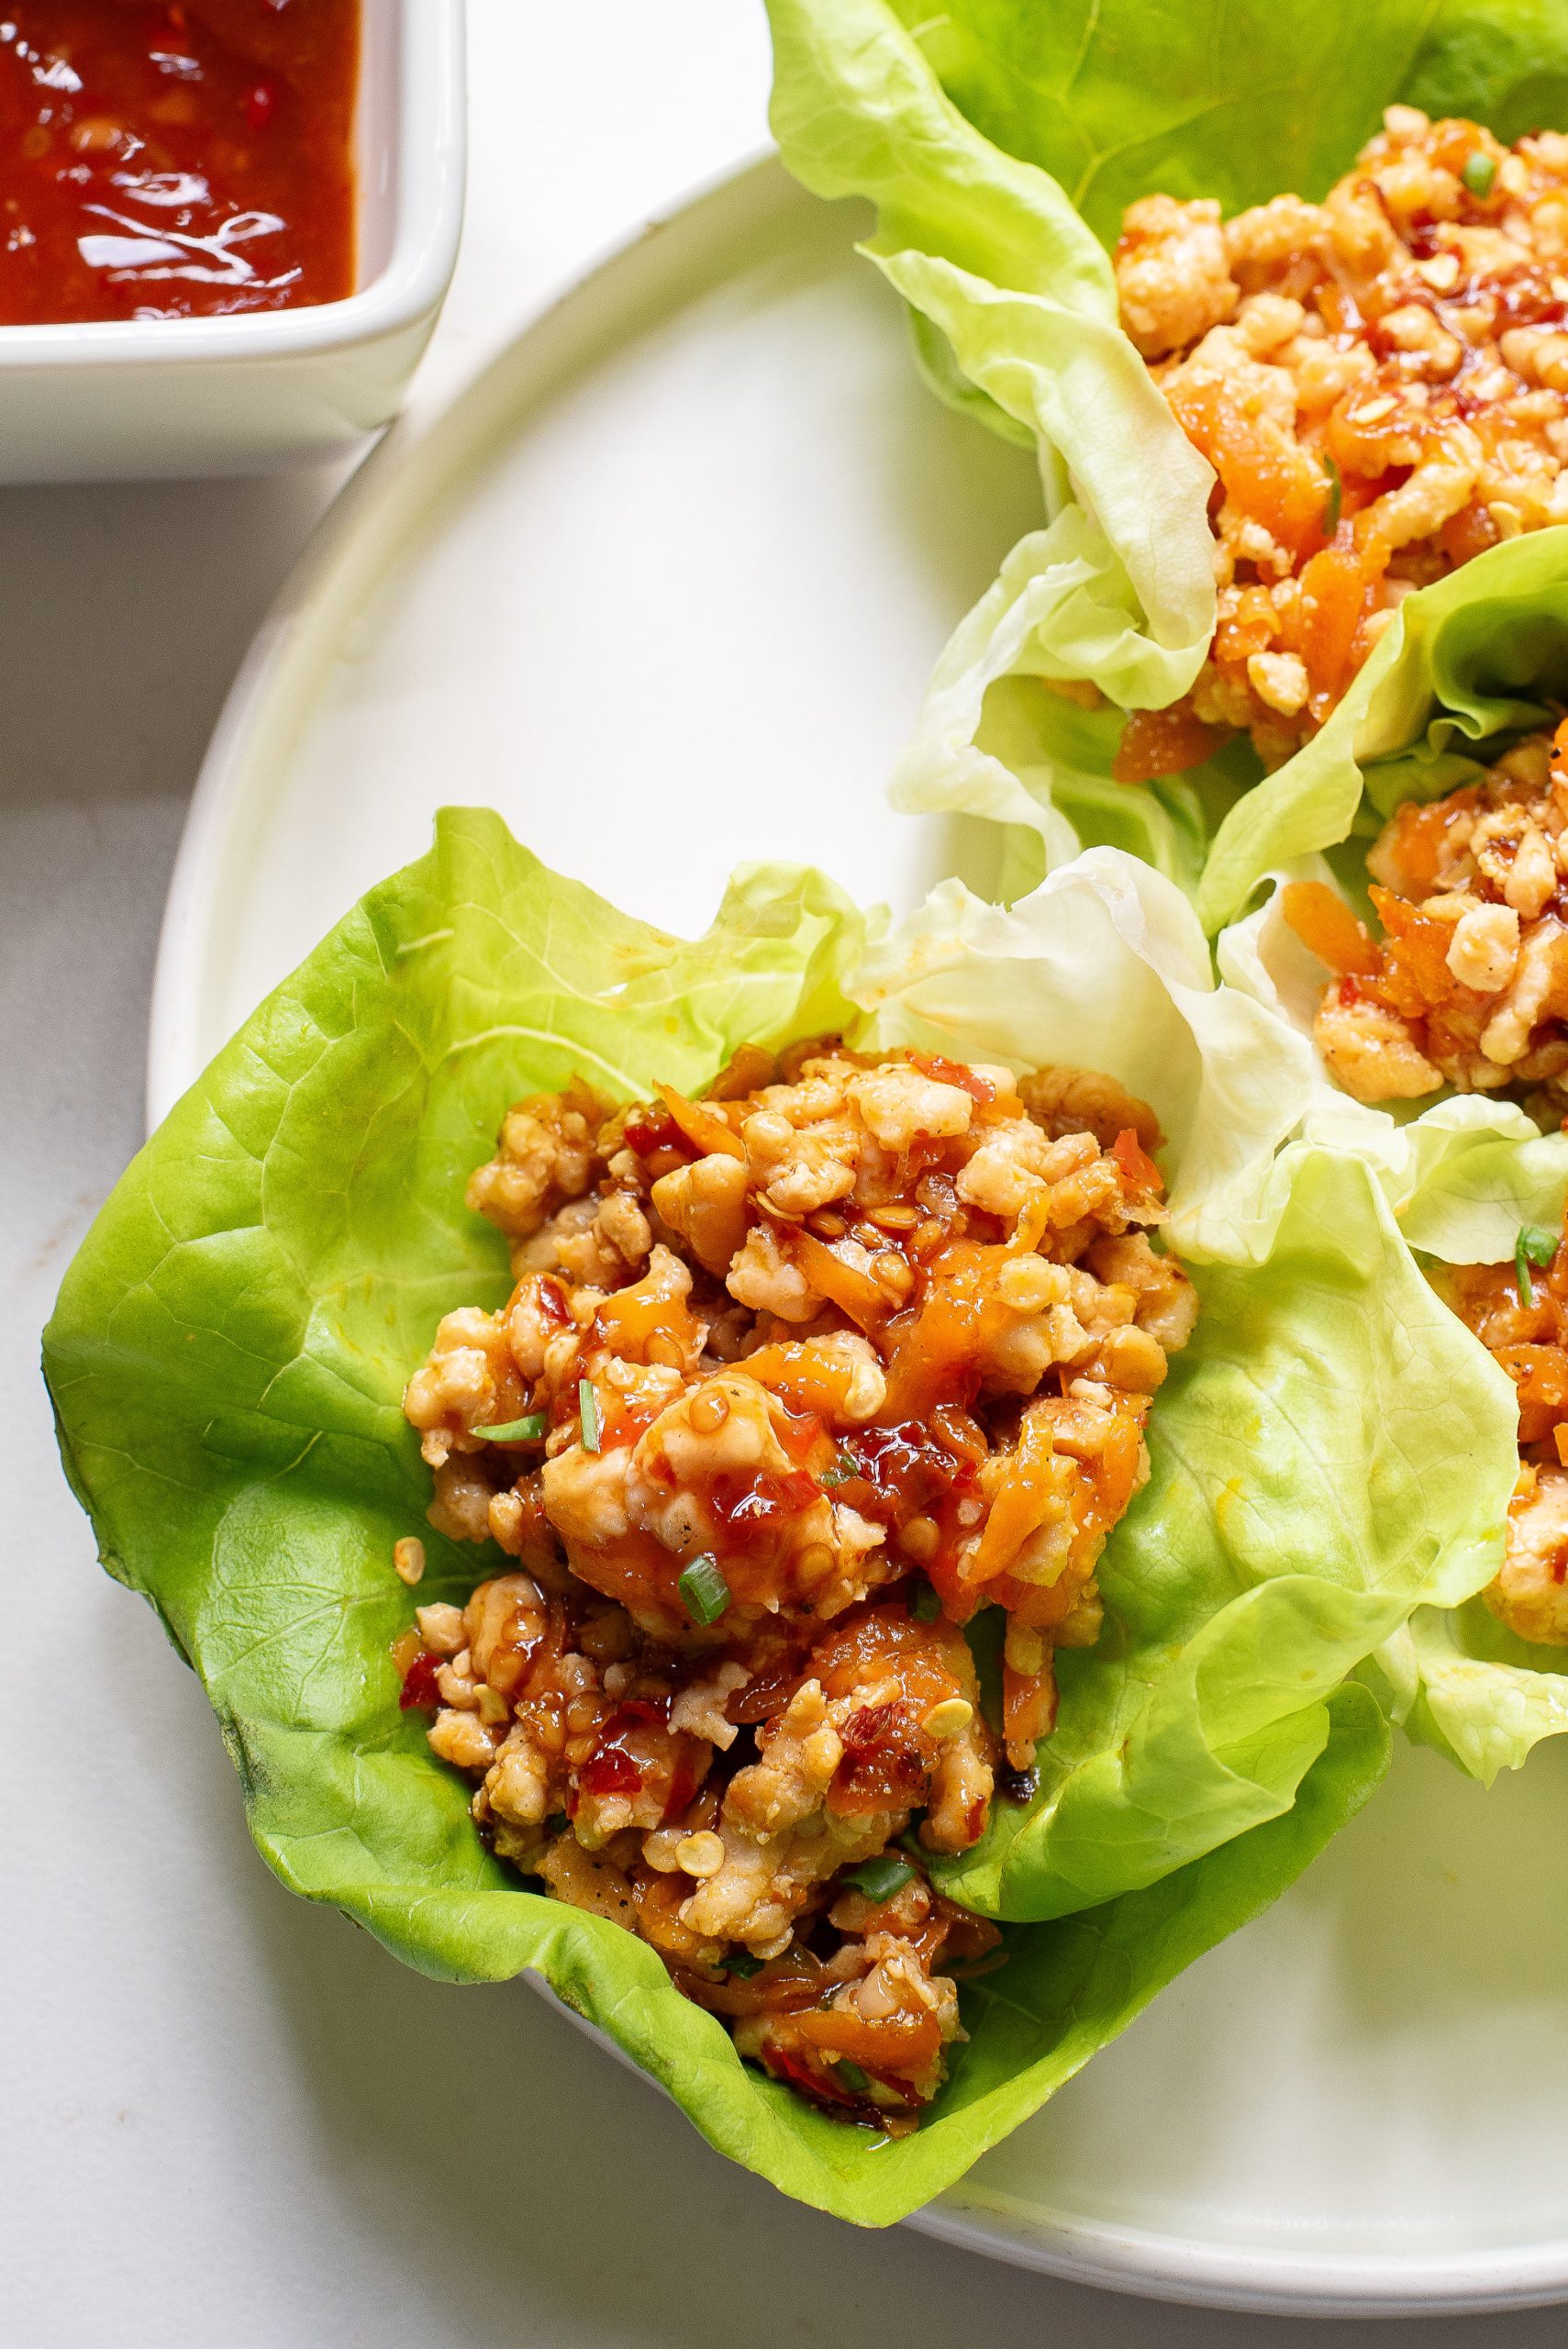 A plate of chicken lettuce wraps beside a bowl of dipping sauce.